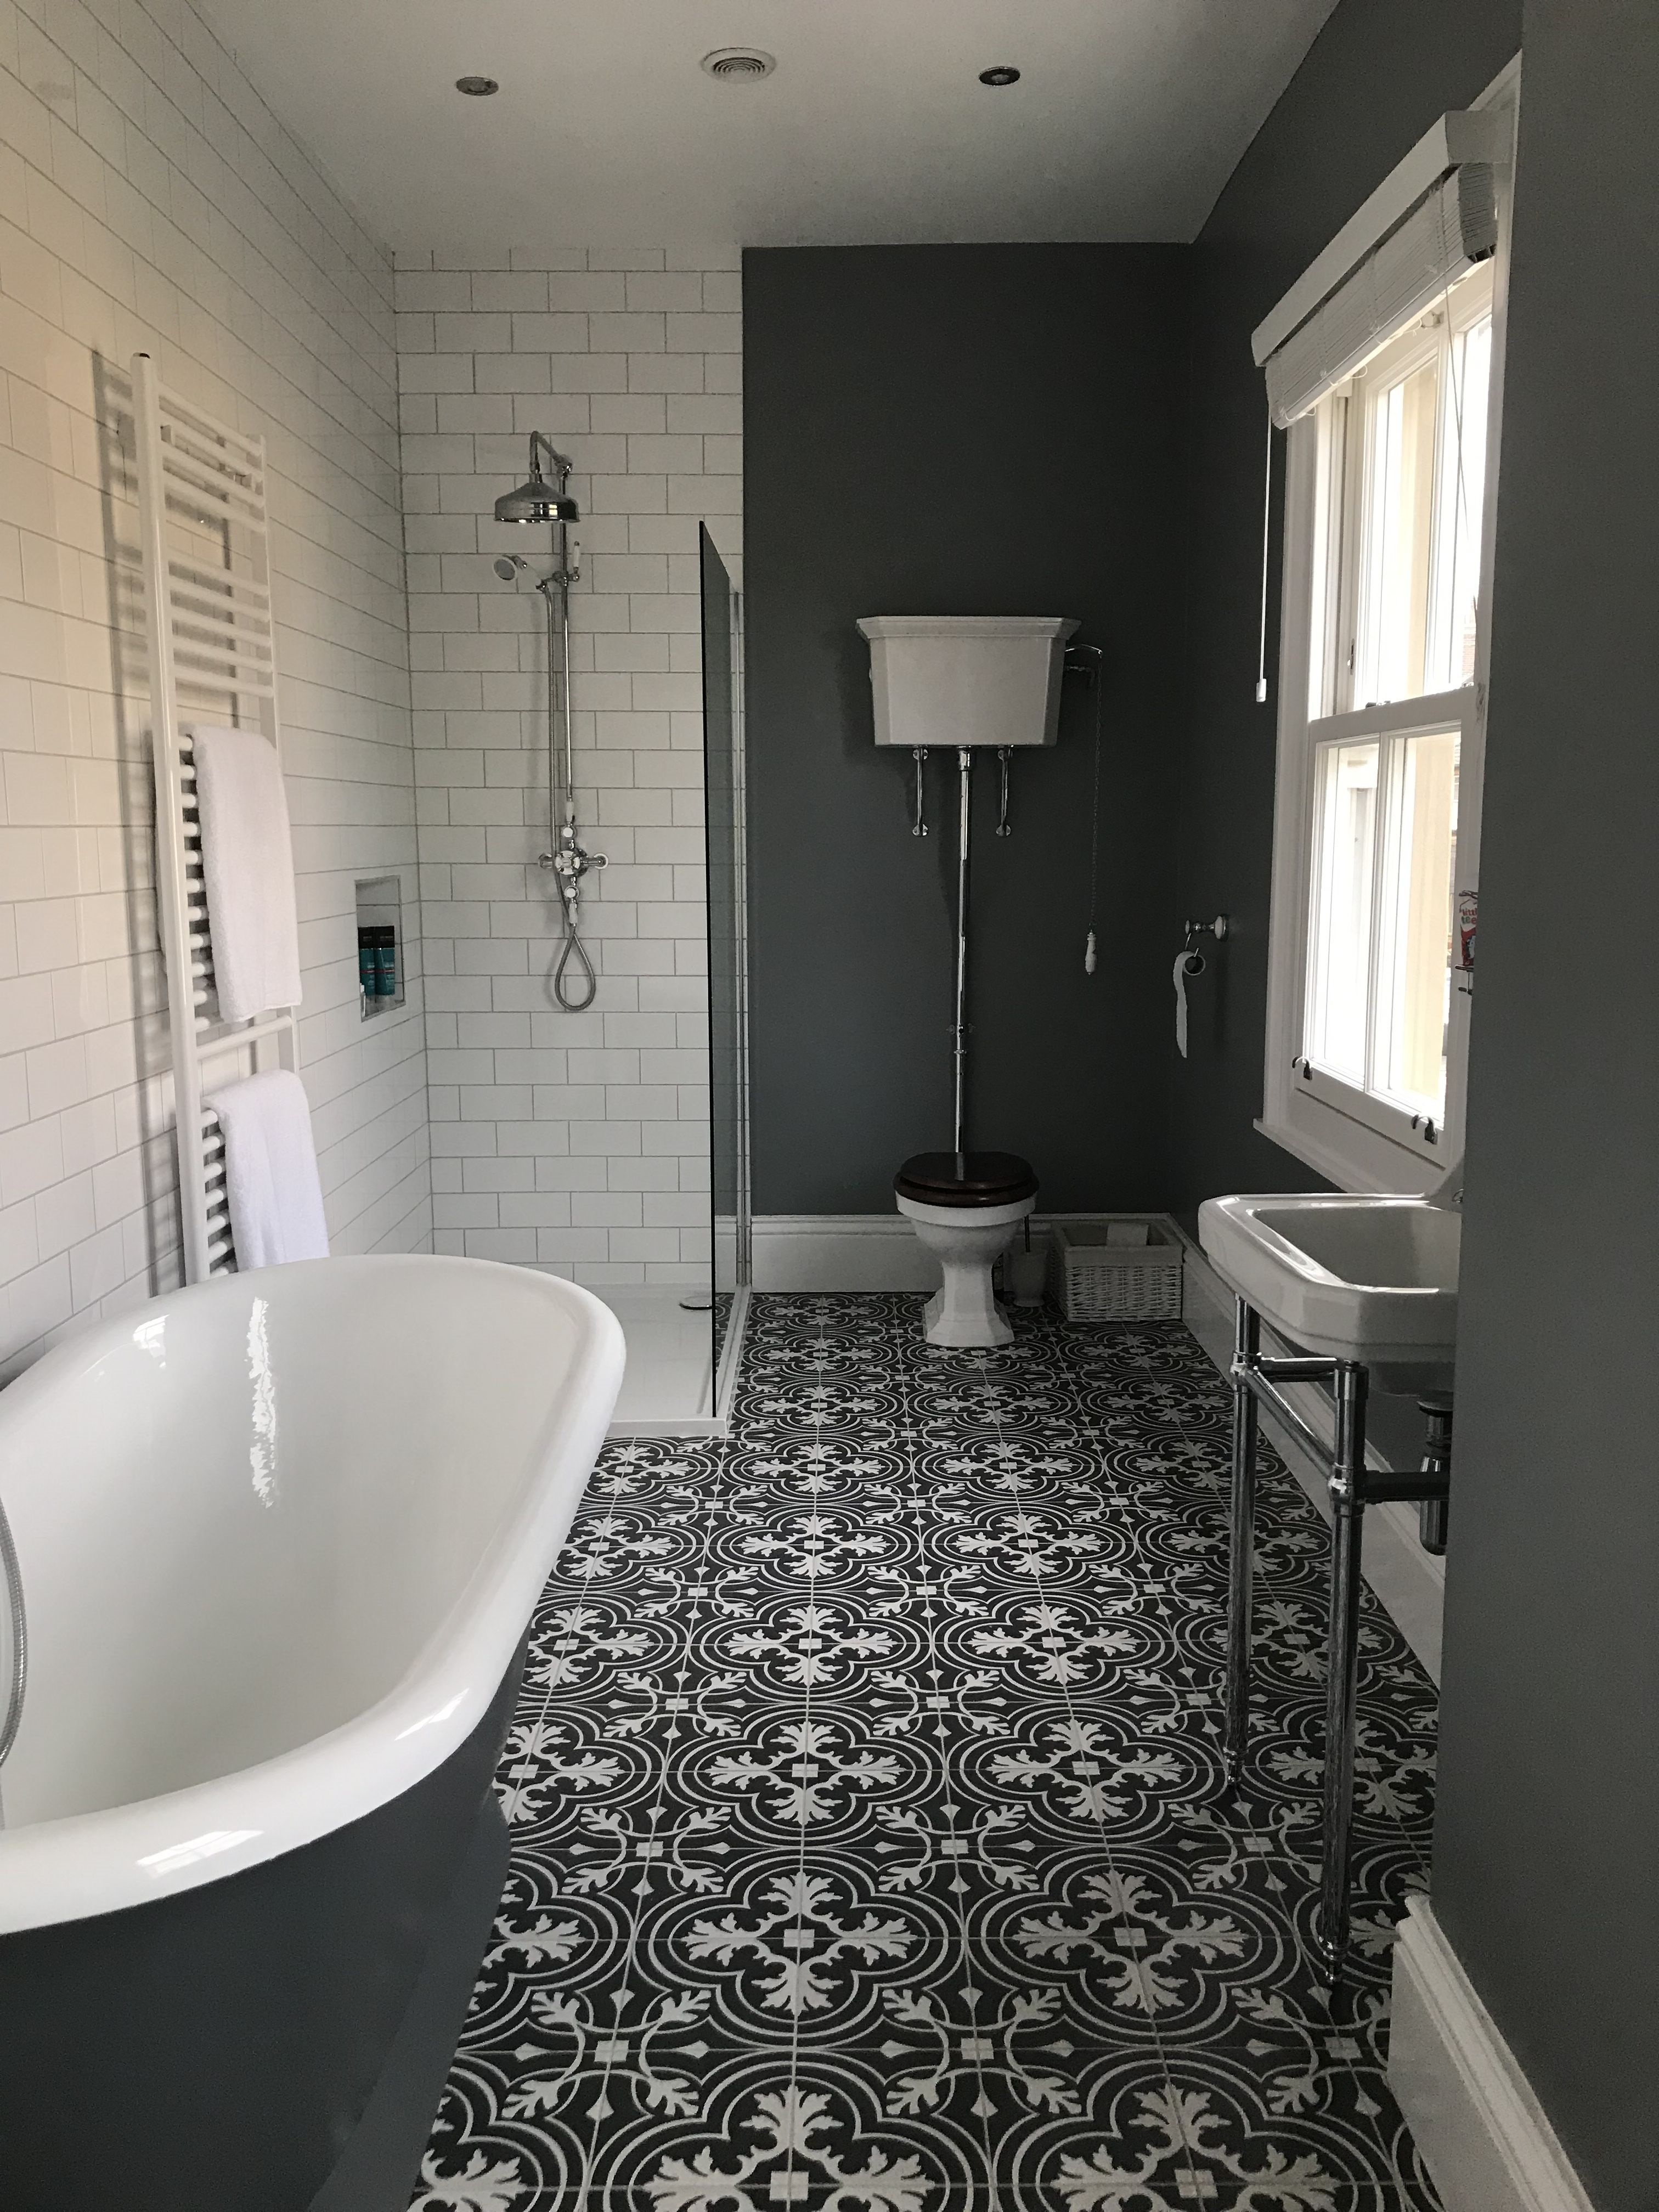 Product Lifestyle image of a Victorian style bathroom, with black and white patterned tiles, a roll top freestanding bath, an exposed pipework shower with riser rail and handset shower, a chrome washstamd with a stepped washbasin, an open back toilet with a black seat and a high level cistern